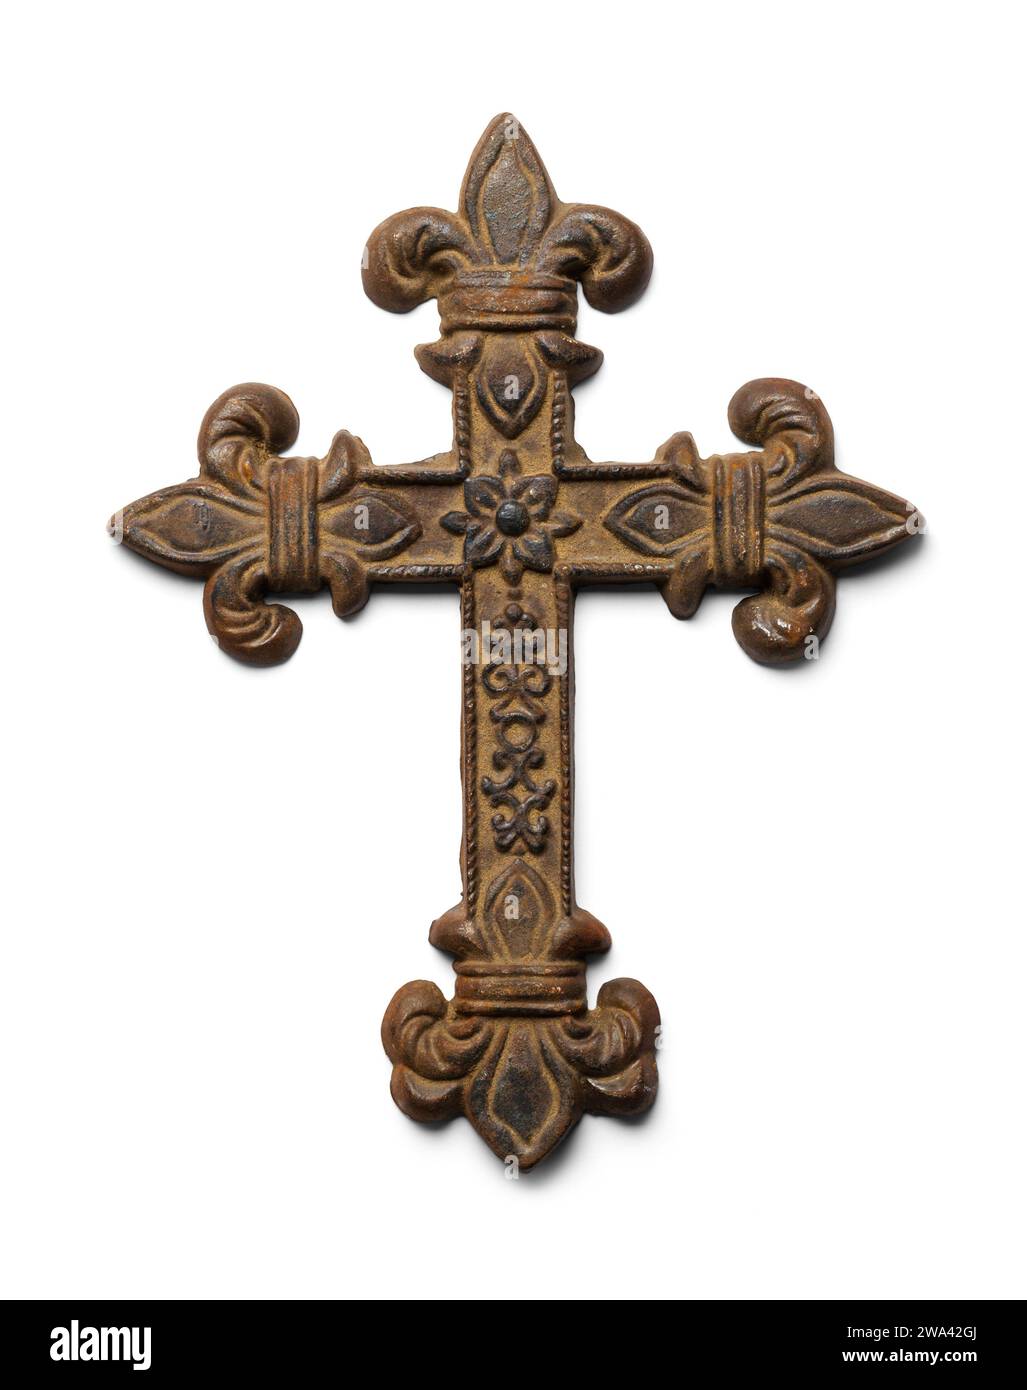 Old Metal Cross Cut Out on White. Stock Photo